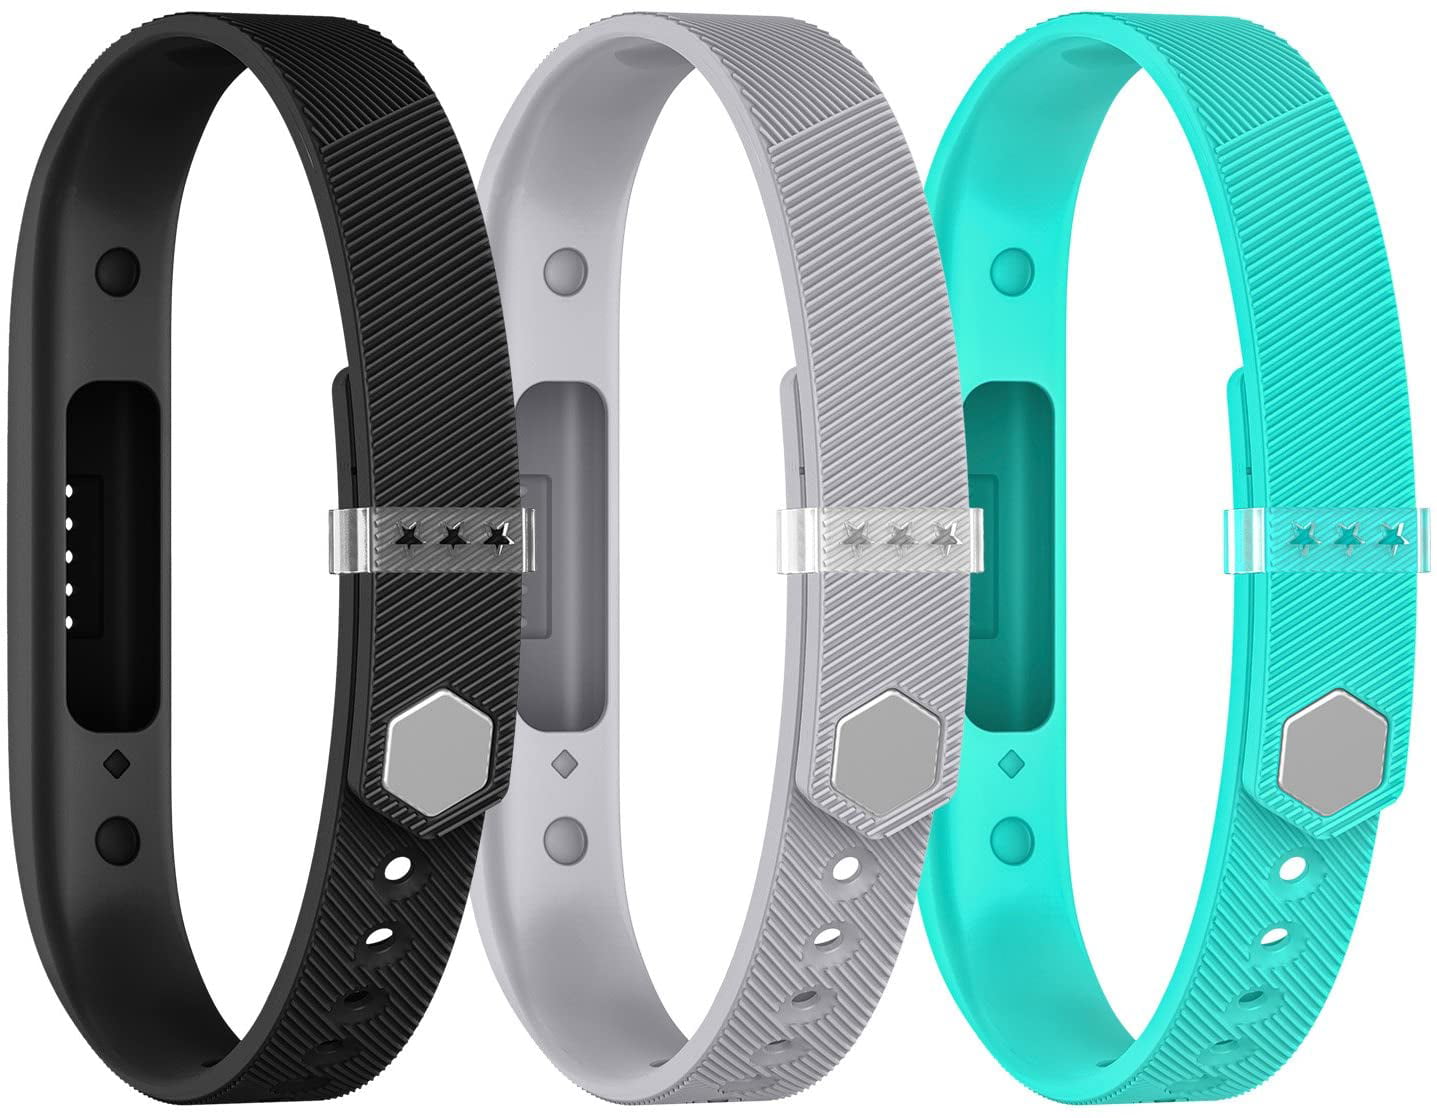 USED Pair 2 of Replacement Wrist Bands for Fitbit Flex Activity Tracker 